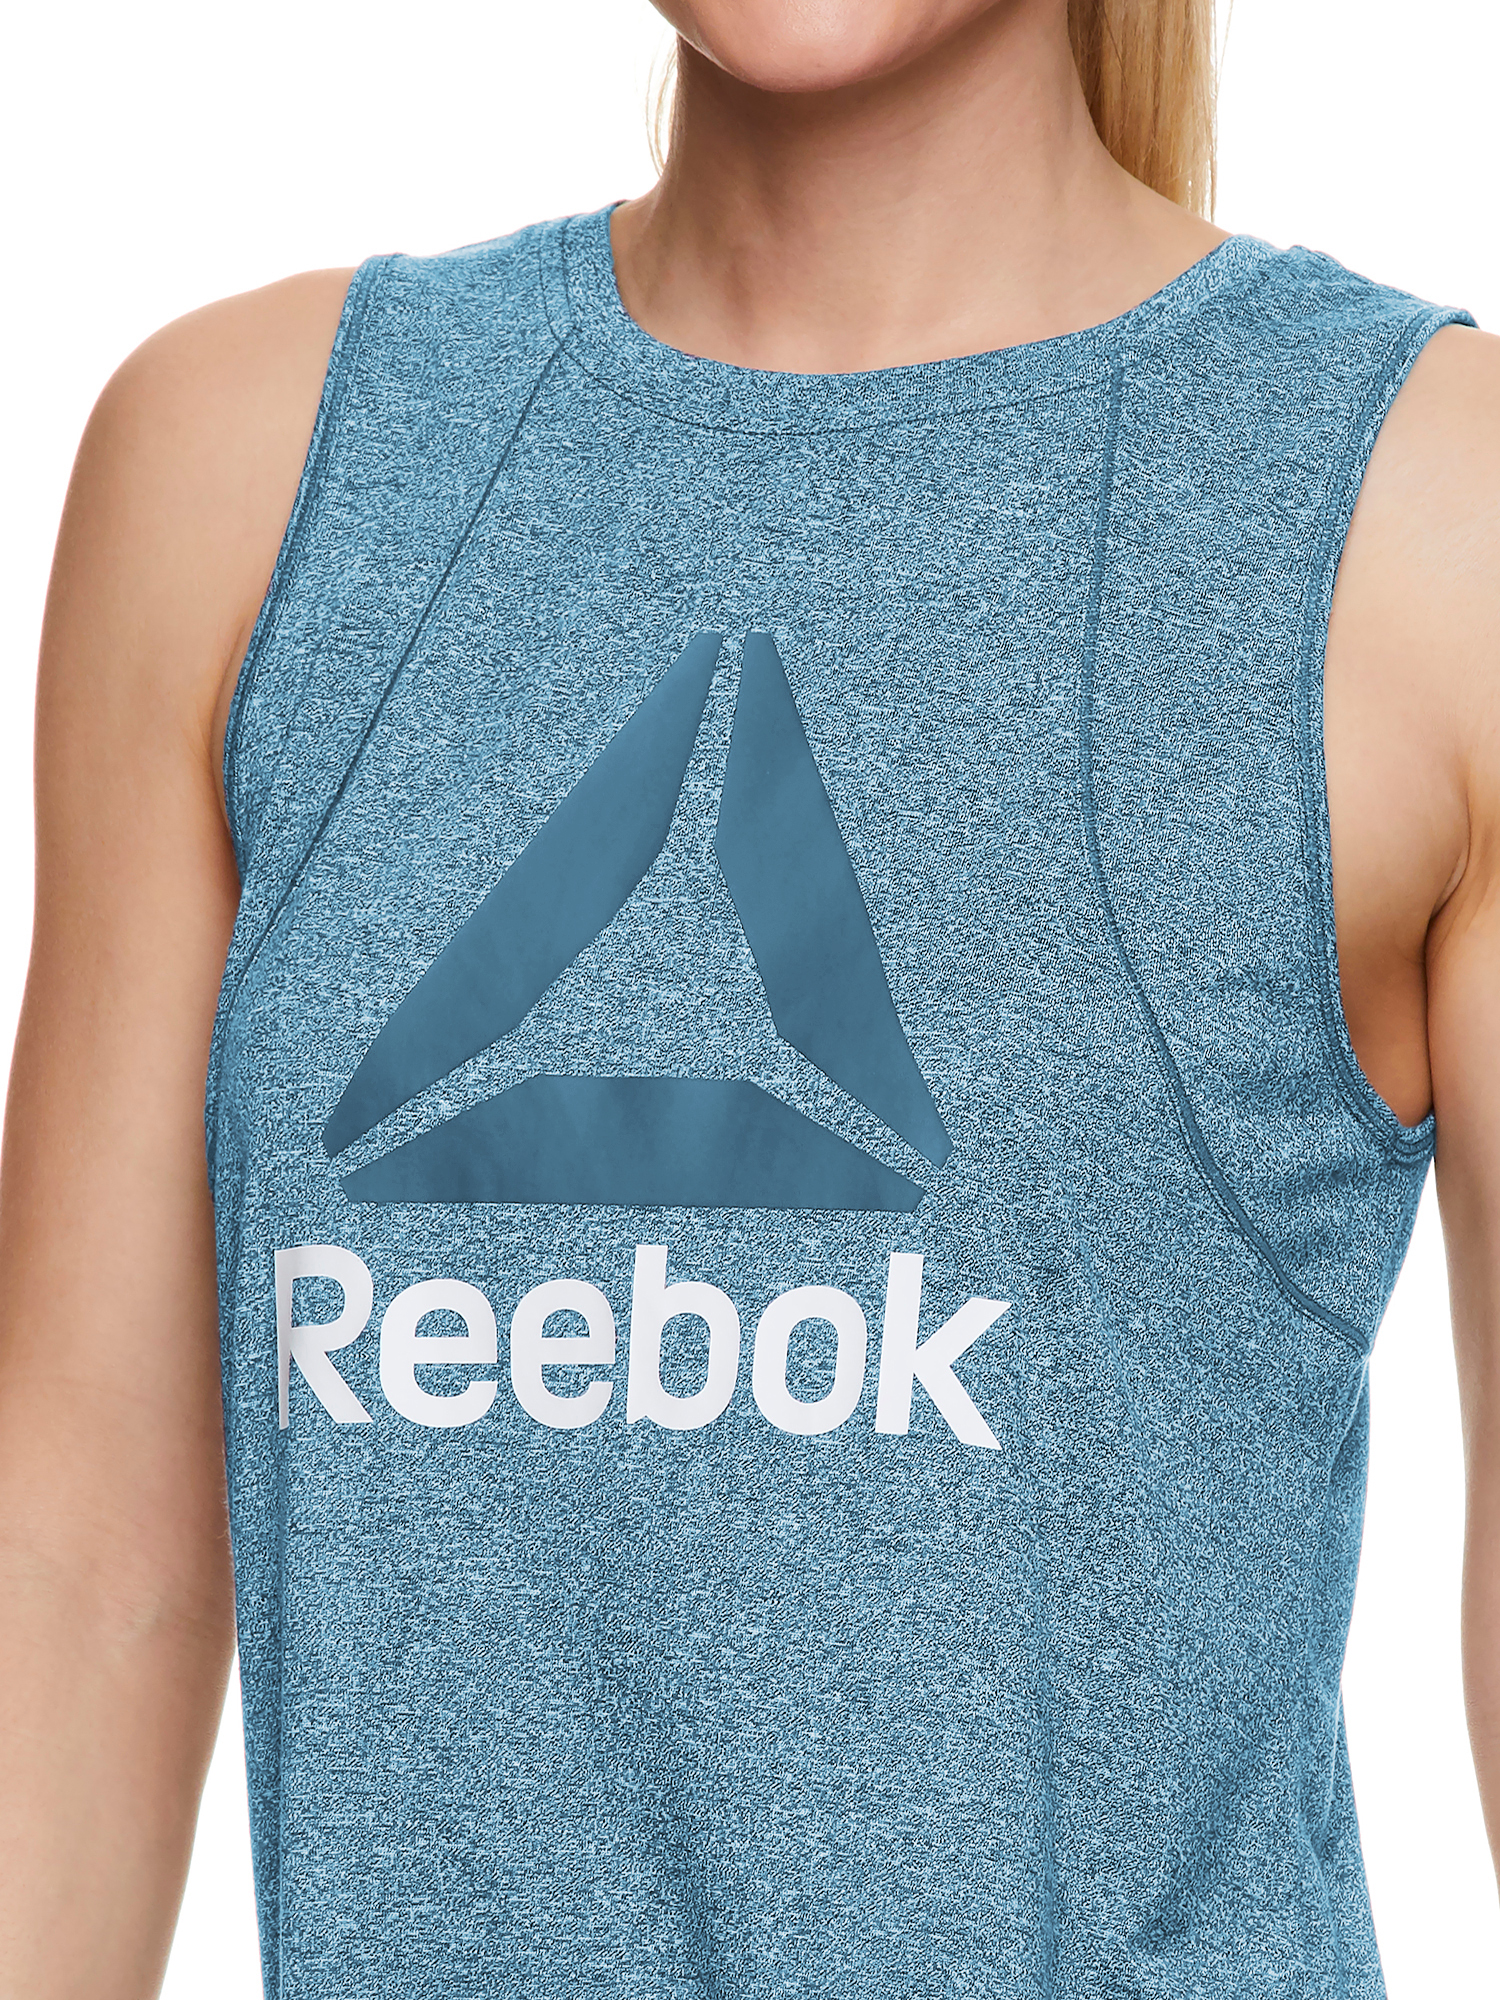 Reebok Womens Muscle Graphic Tank Top - image 2 of 4